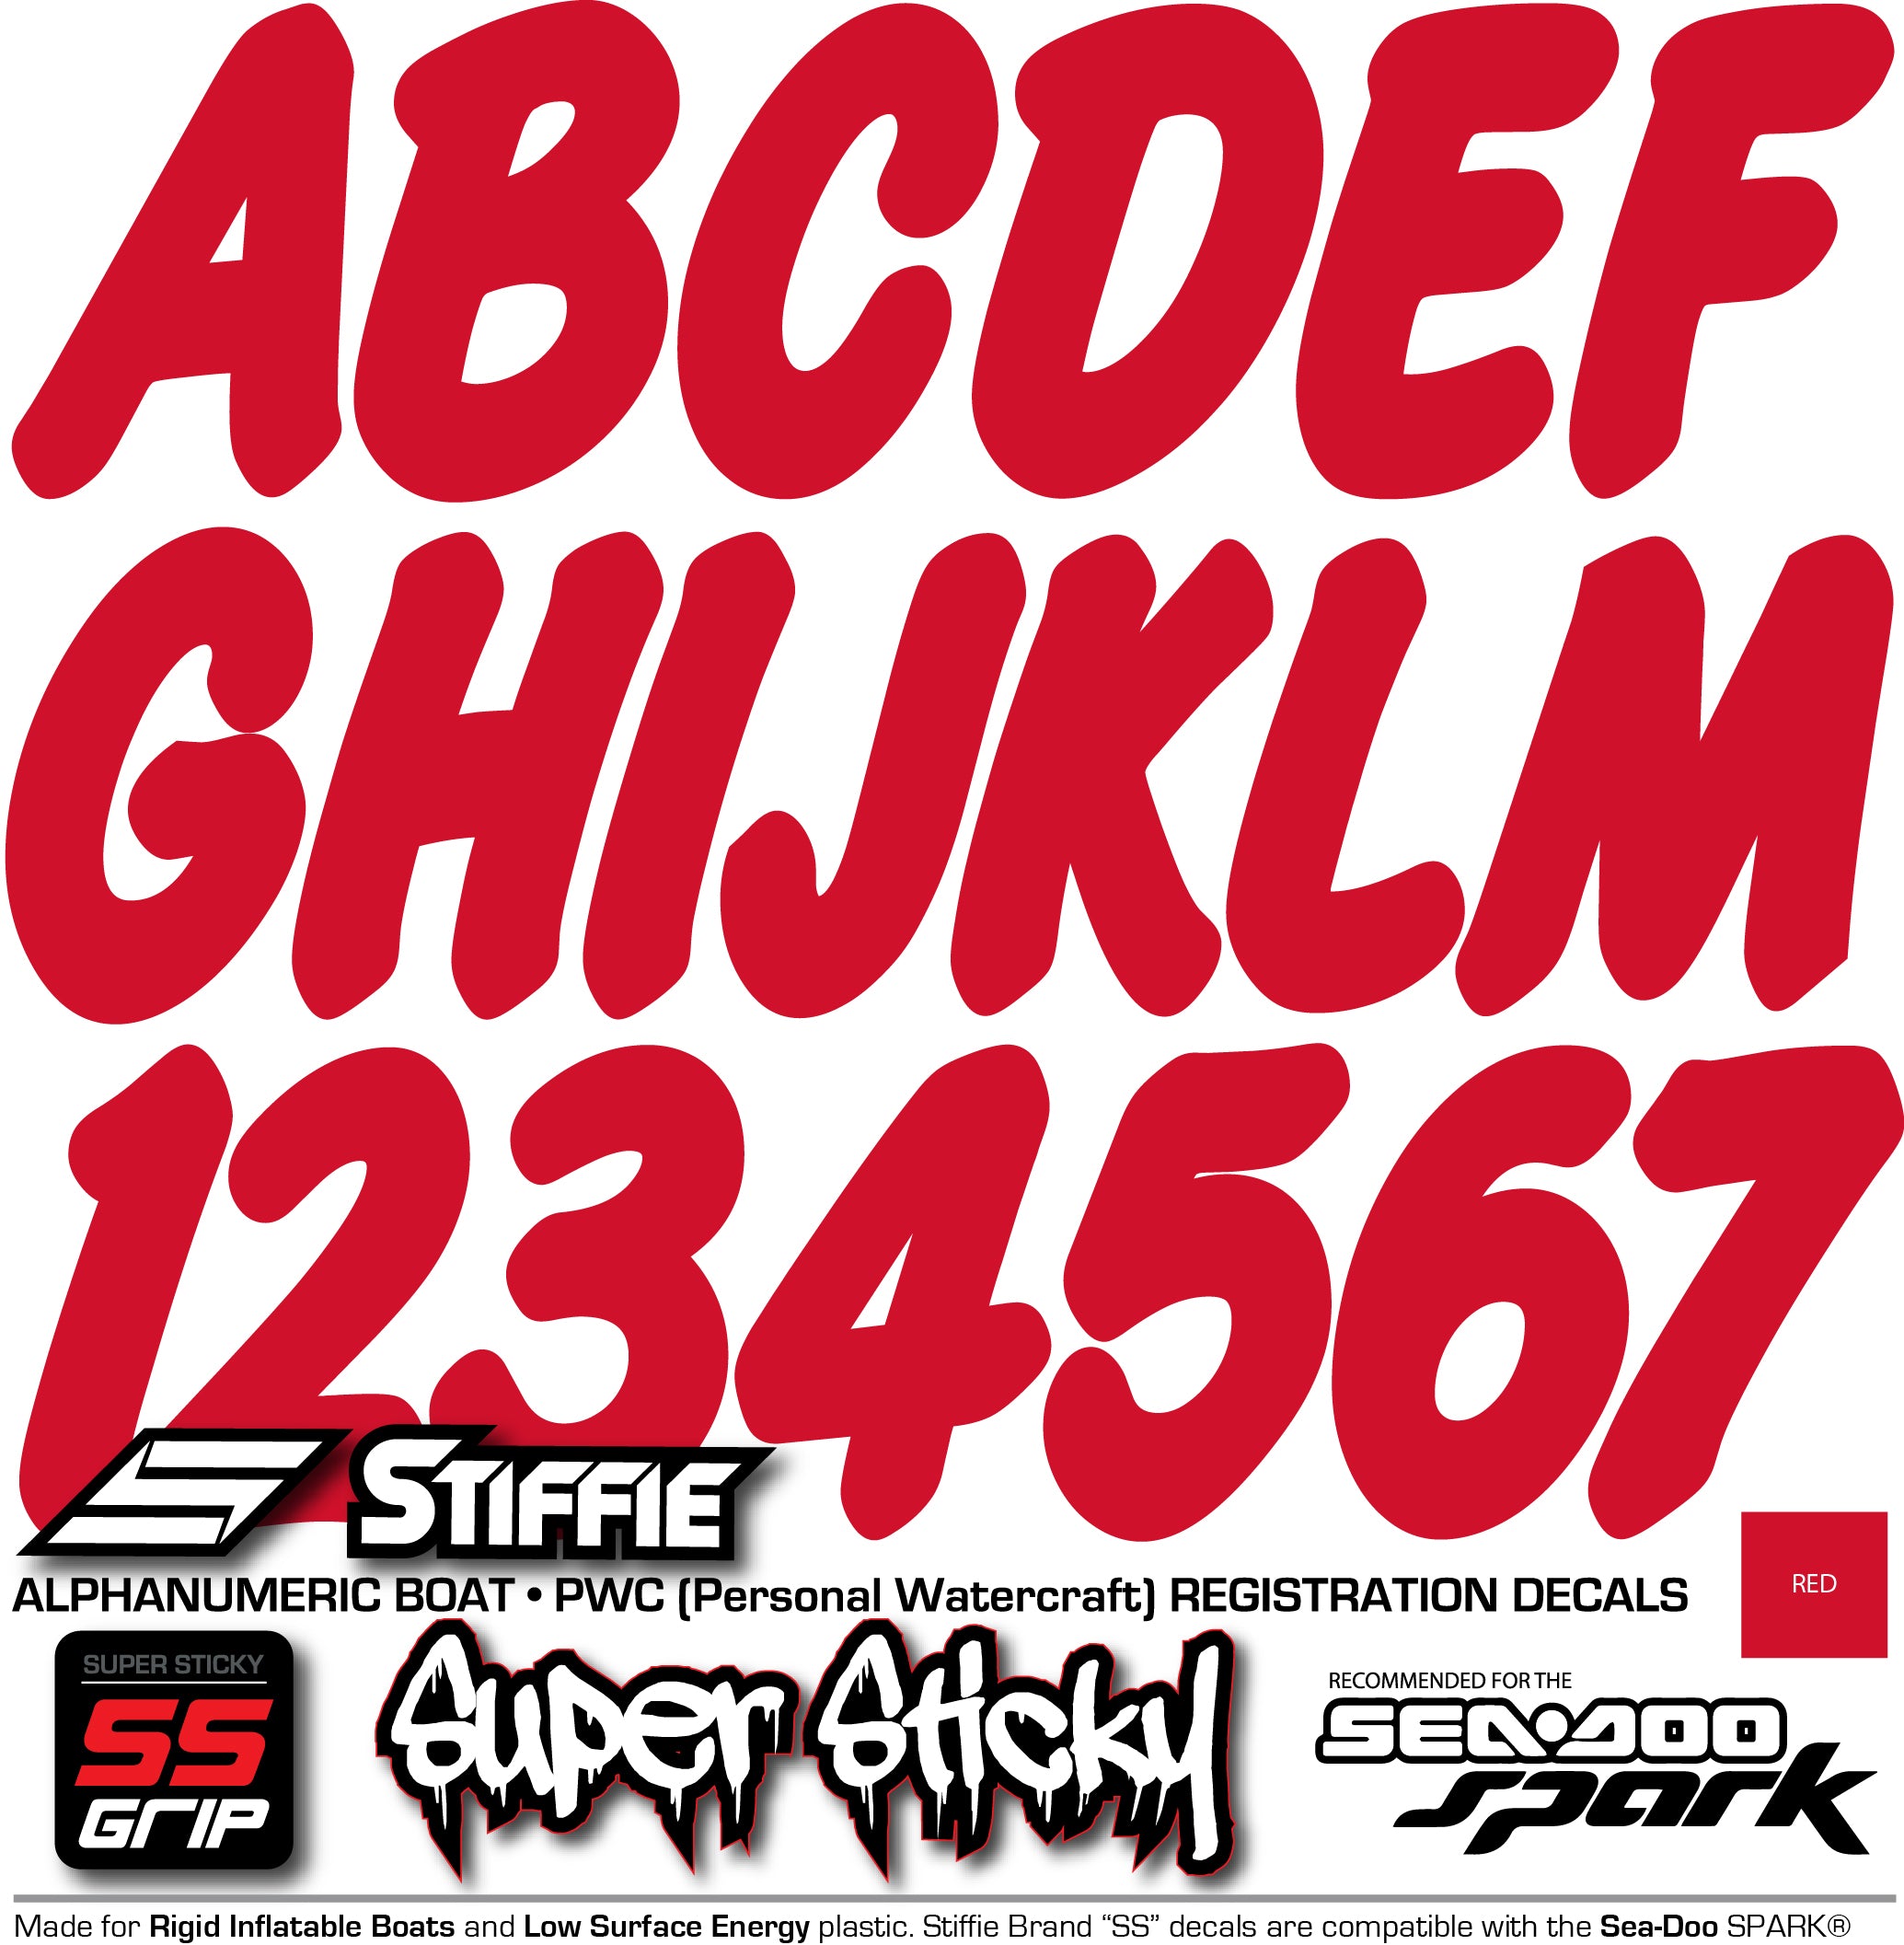 Stiffie Whip-One Red Super Sticky 3" Alpha Numeric Registration Identification Numbers Stickers Decals for Sea-Doo Spark, Inflatable Boats, Ribs, Hypalon/PVC, PWC and Boats